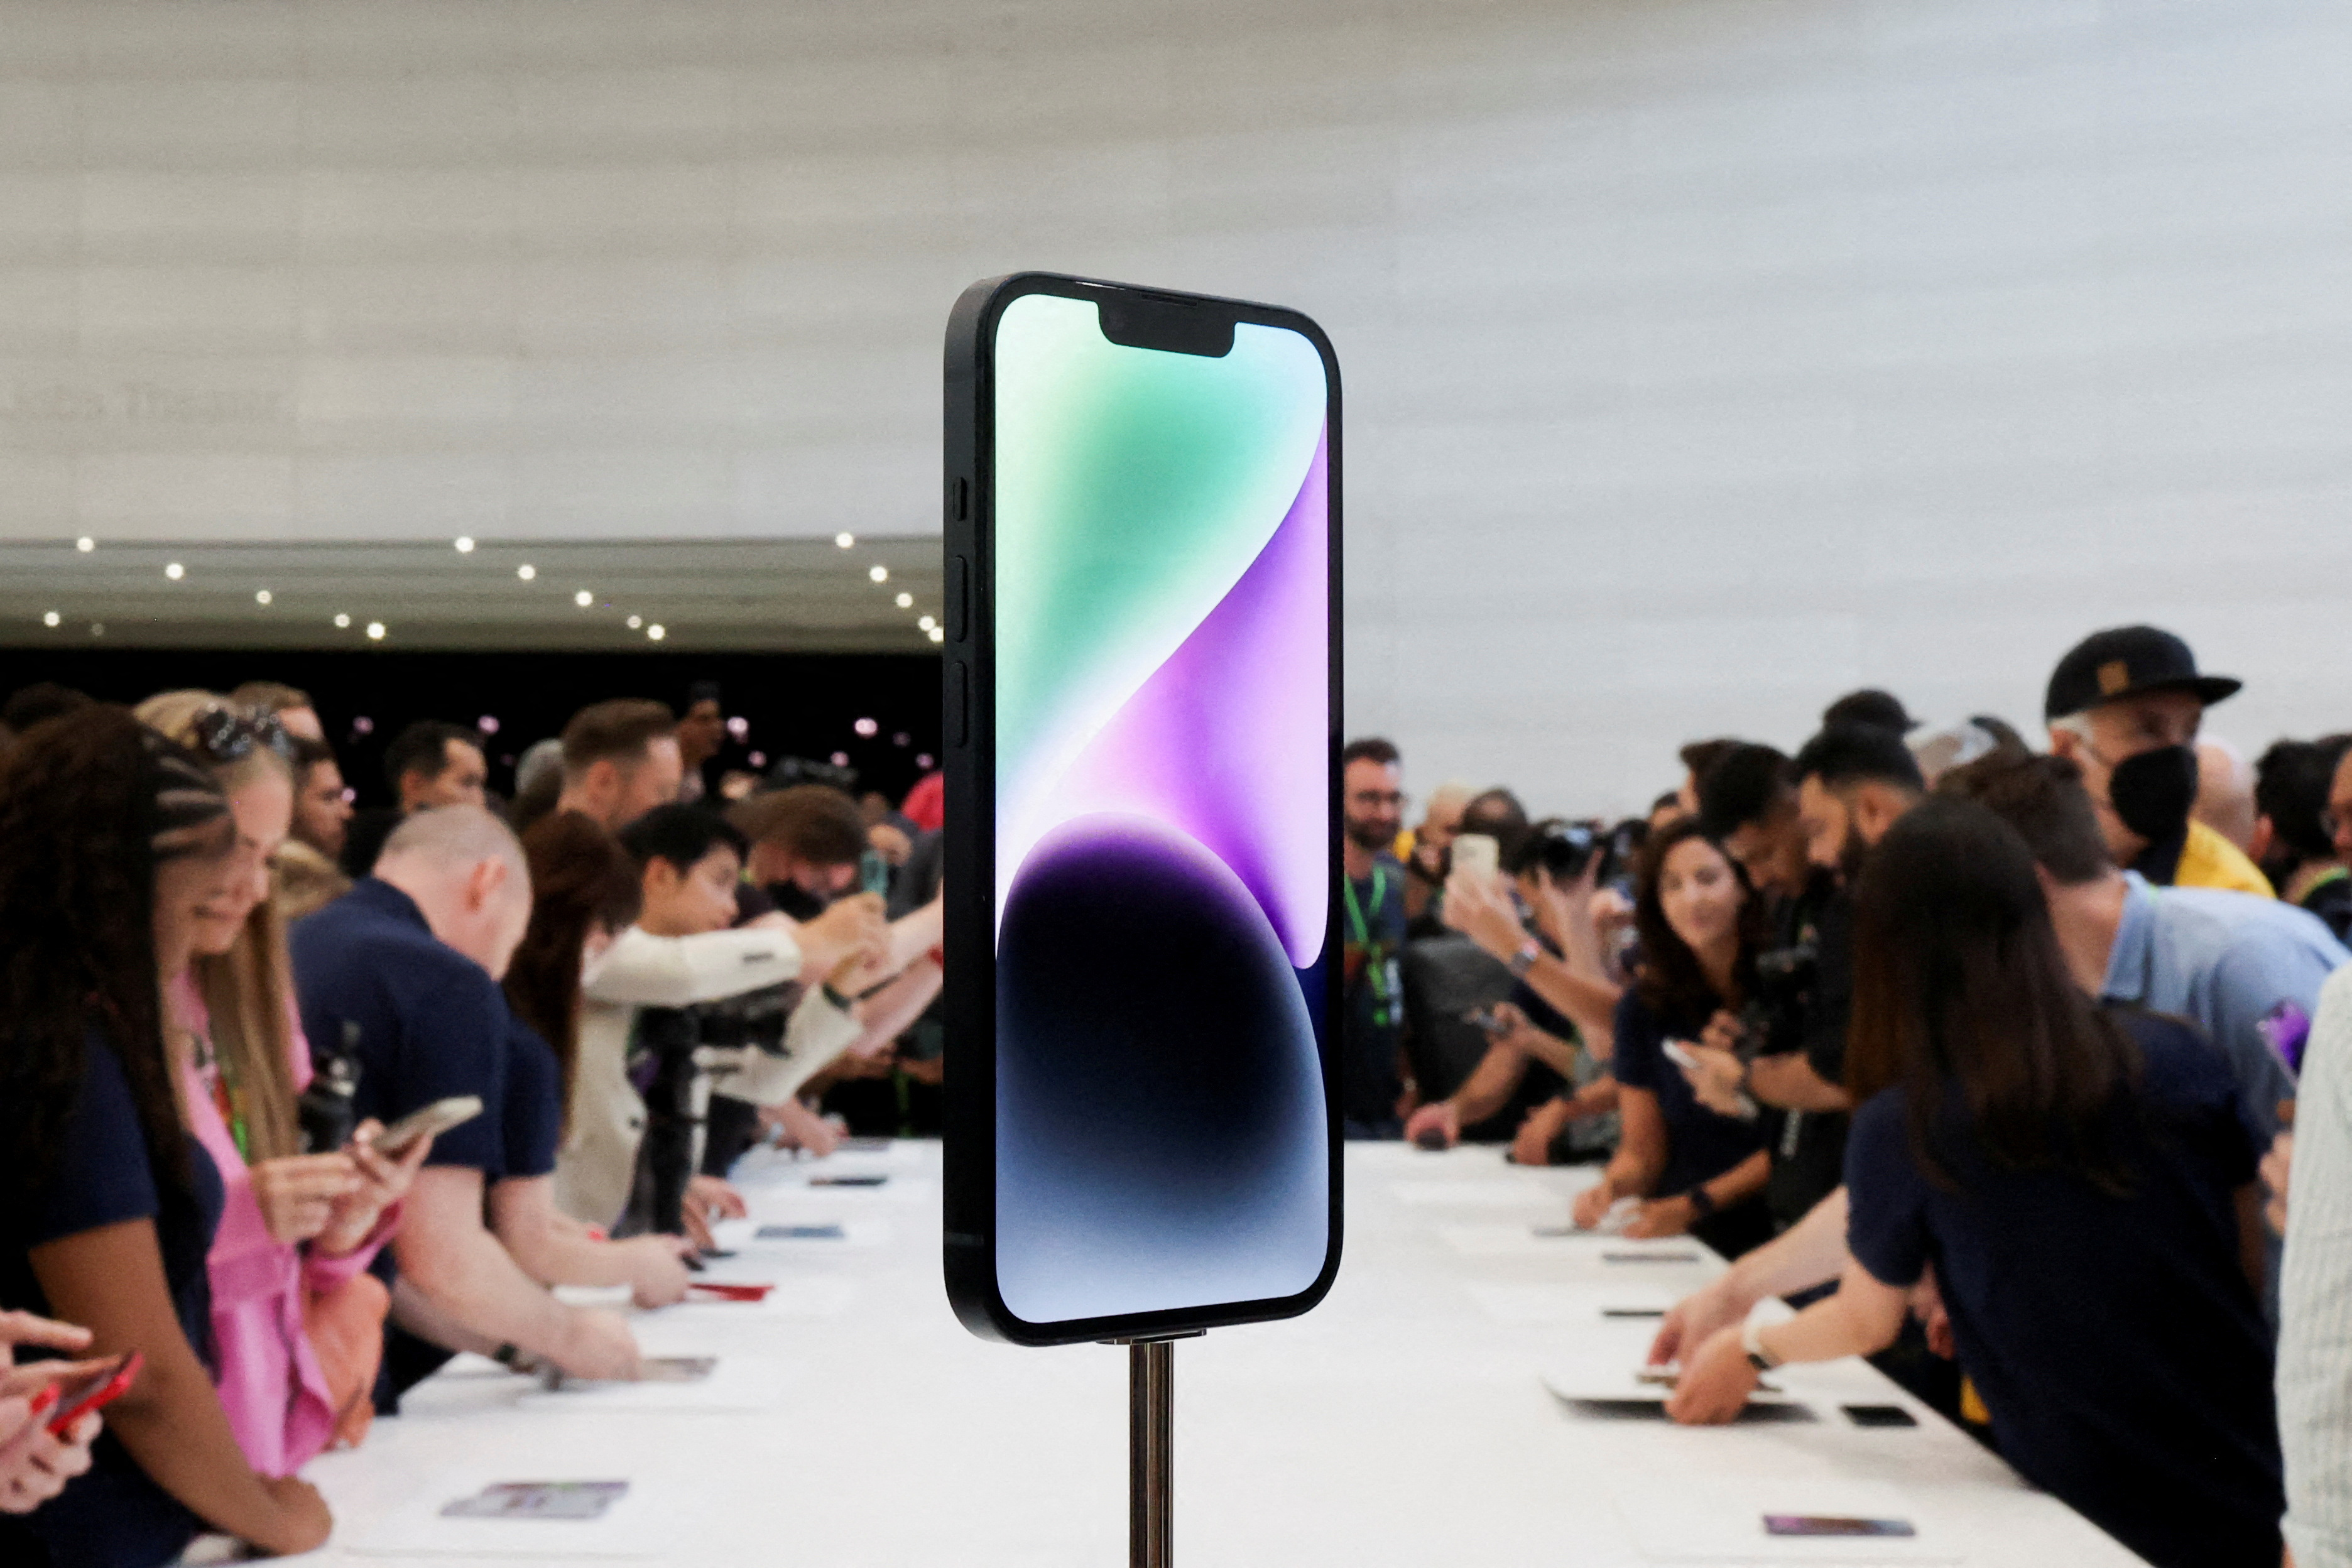 The new iPhone 14 were presented at the Steve Jobs Theater in Cupertino, California and will have prices ranging from $799 for its regular version to $1,099 for its Pro Max version.  (REUTERS/Carlos Barria/File Photo)